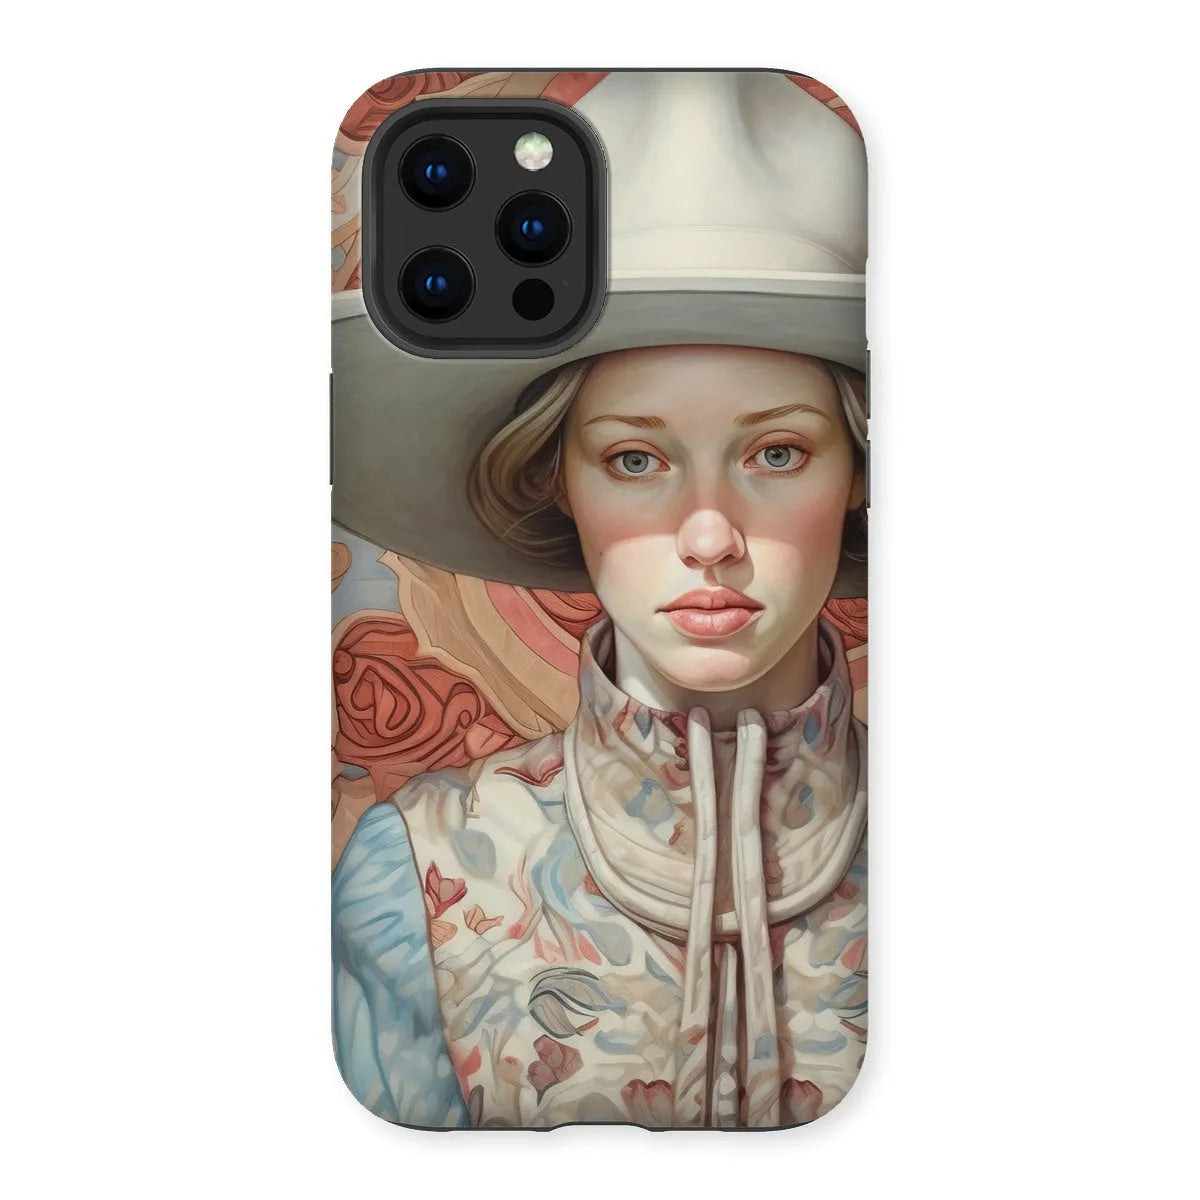 Lottie The Lesbian Cowgirl - Sapphic Art Phone Case - Iphone 12 Pro Max / Matte - Mobile Phone Cases - Aesthetic Art